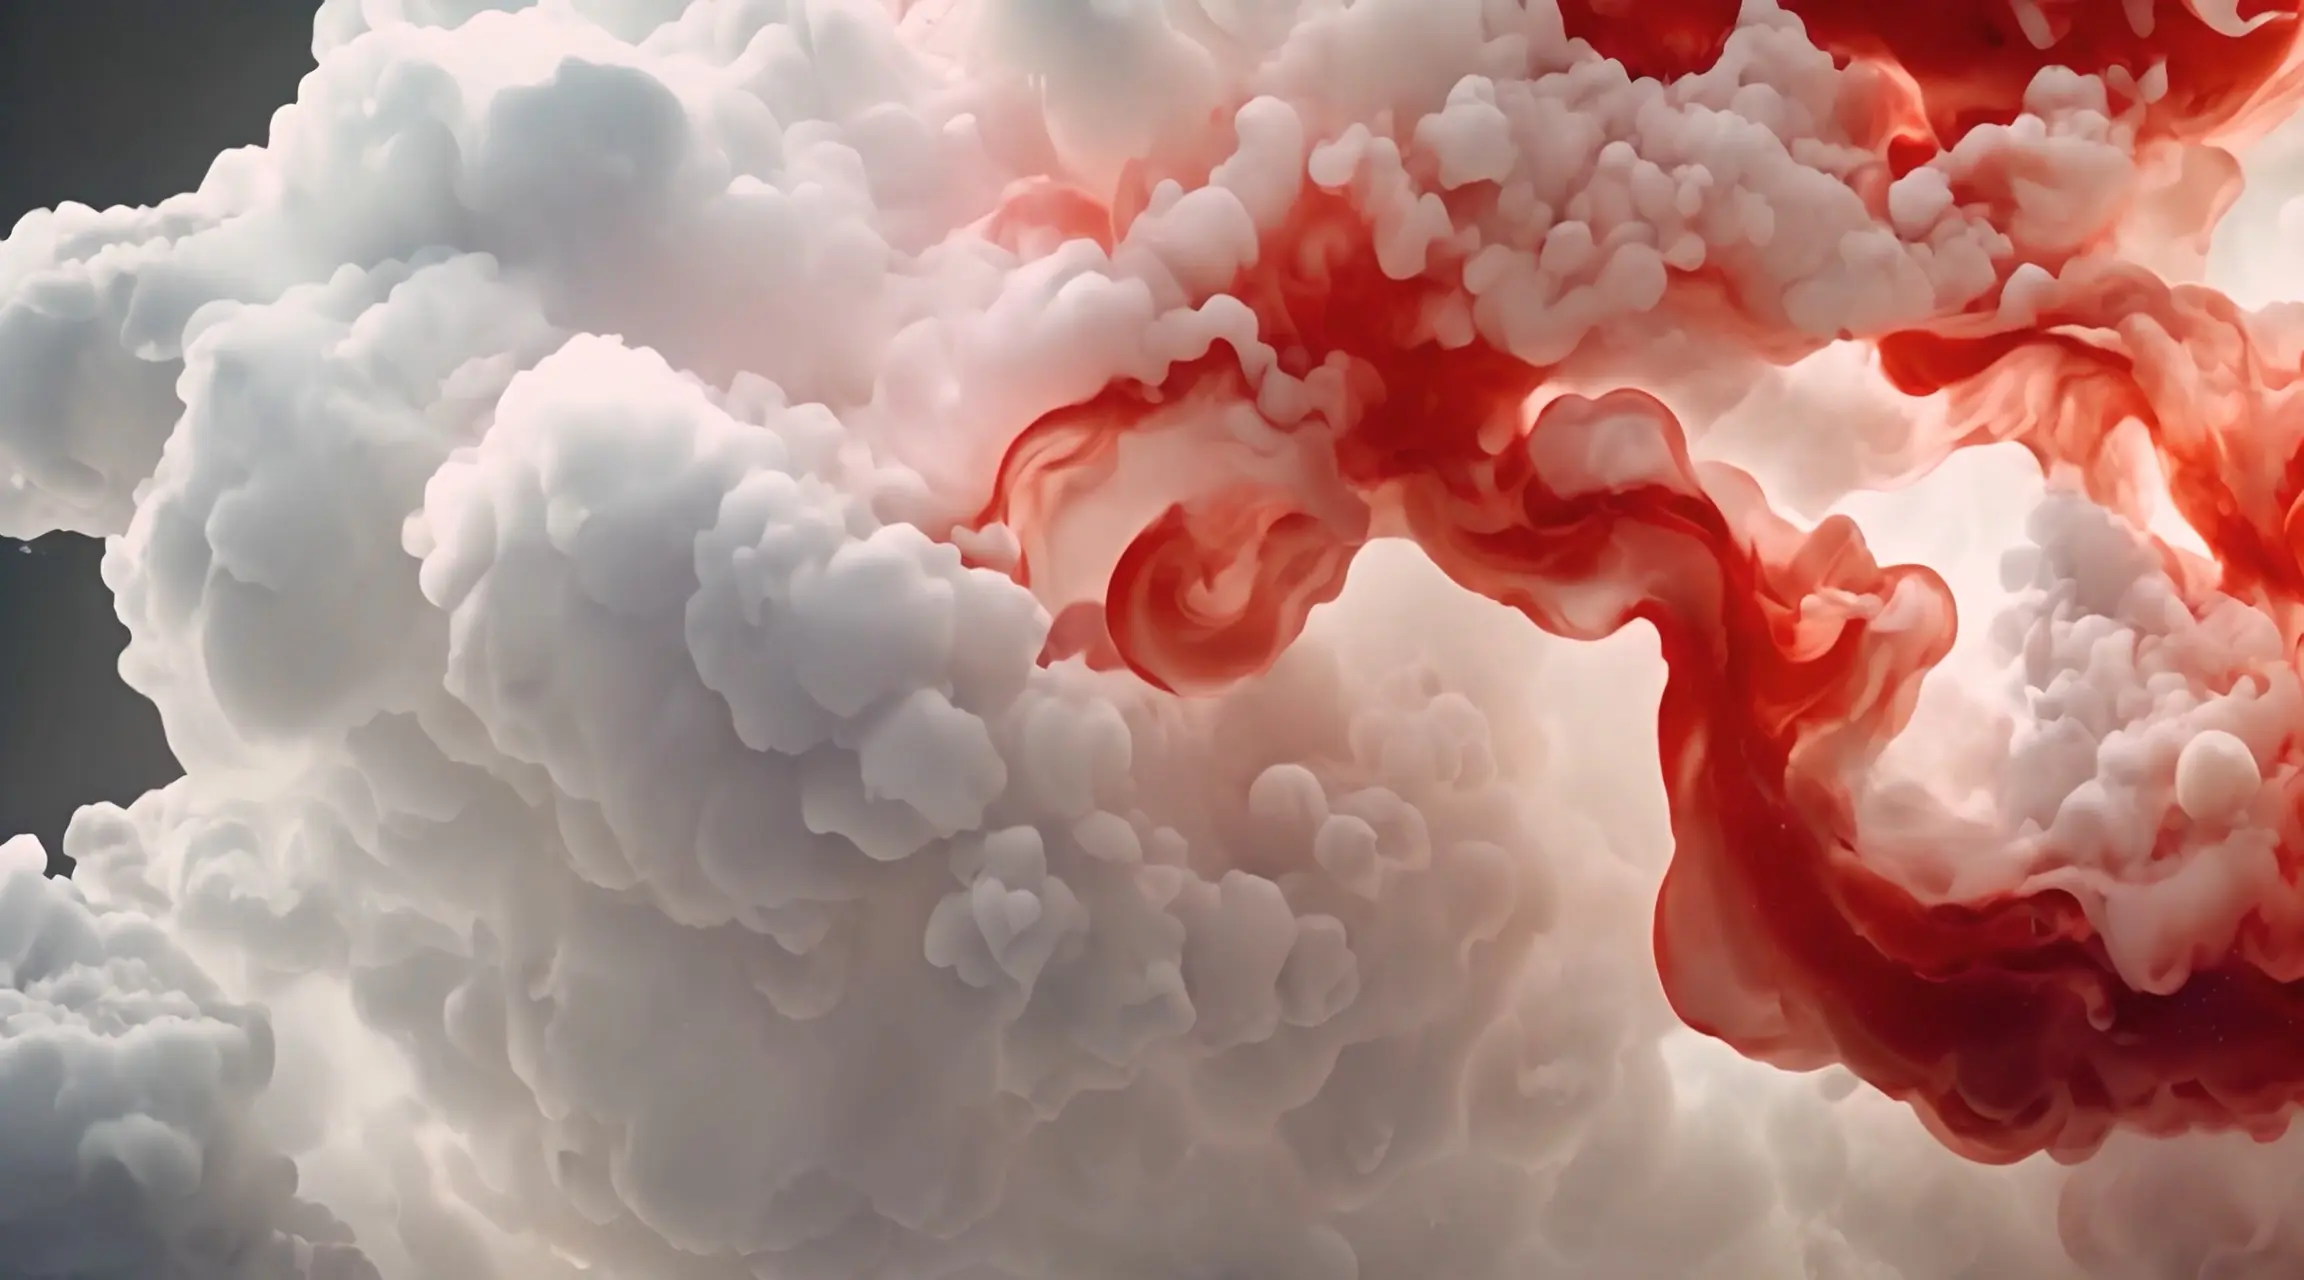 Abstract Smock Waves in Red and White Video